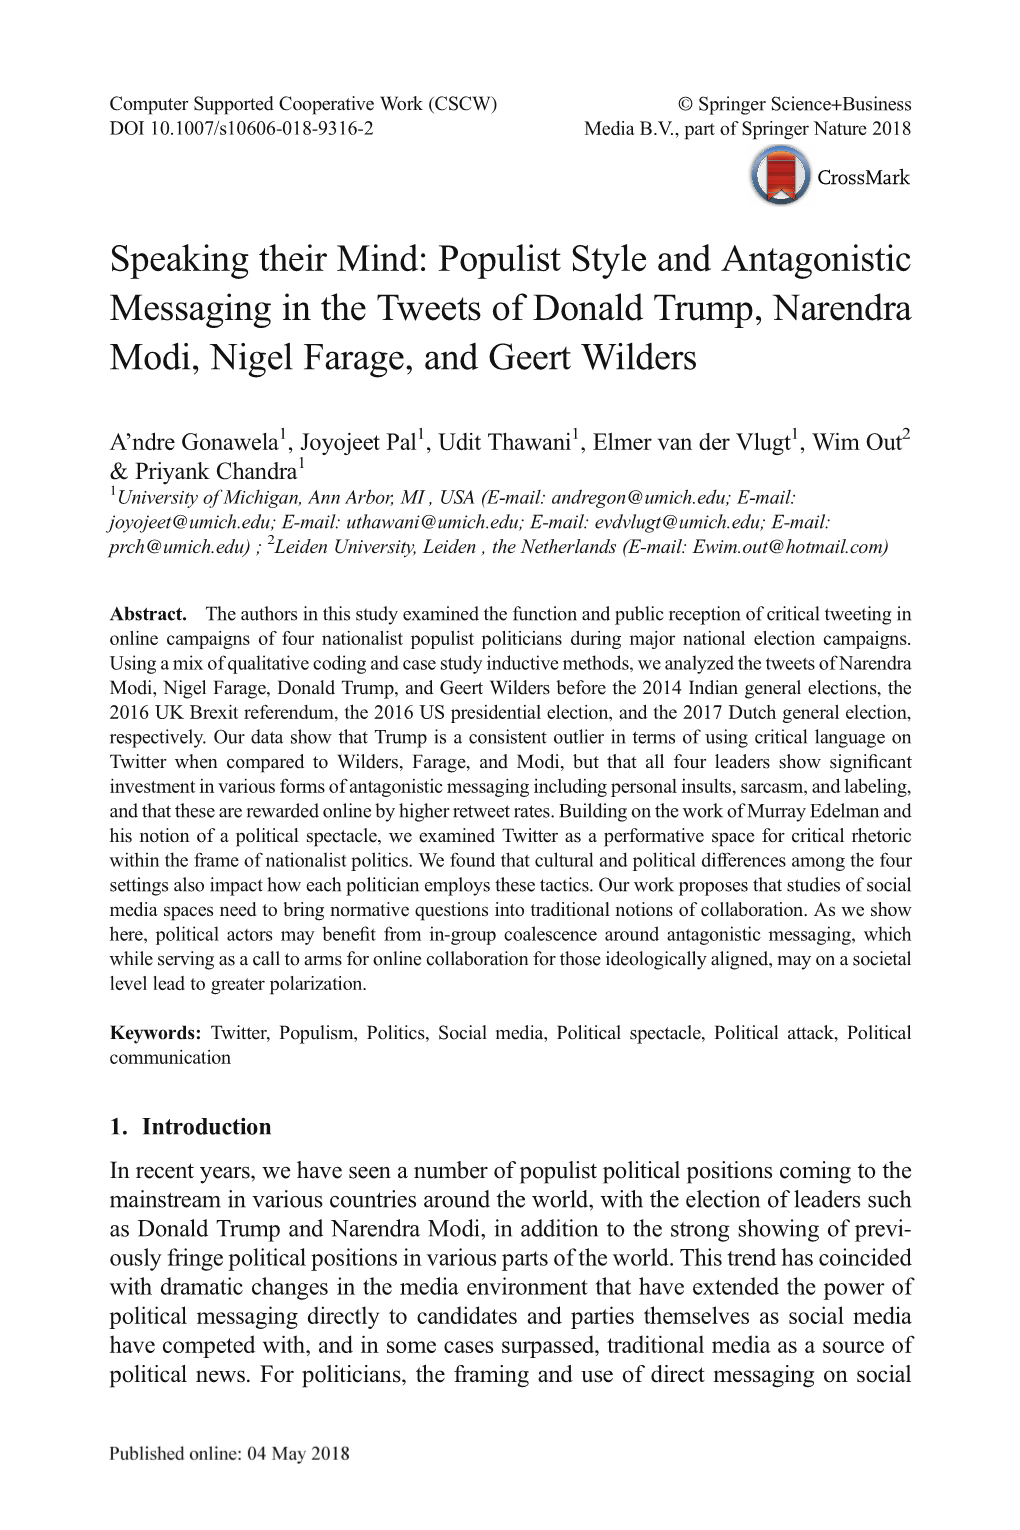 Populist Style and Antagonistic Messaging in the Tweets of Donald Trump, Narendra Modi, Nigel Farage, and Geert Wilders